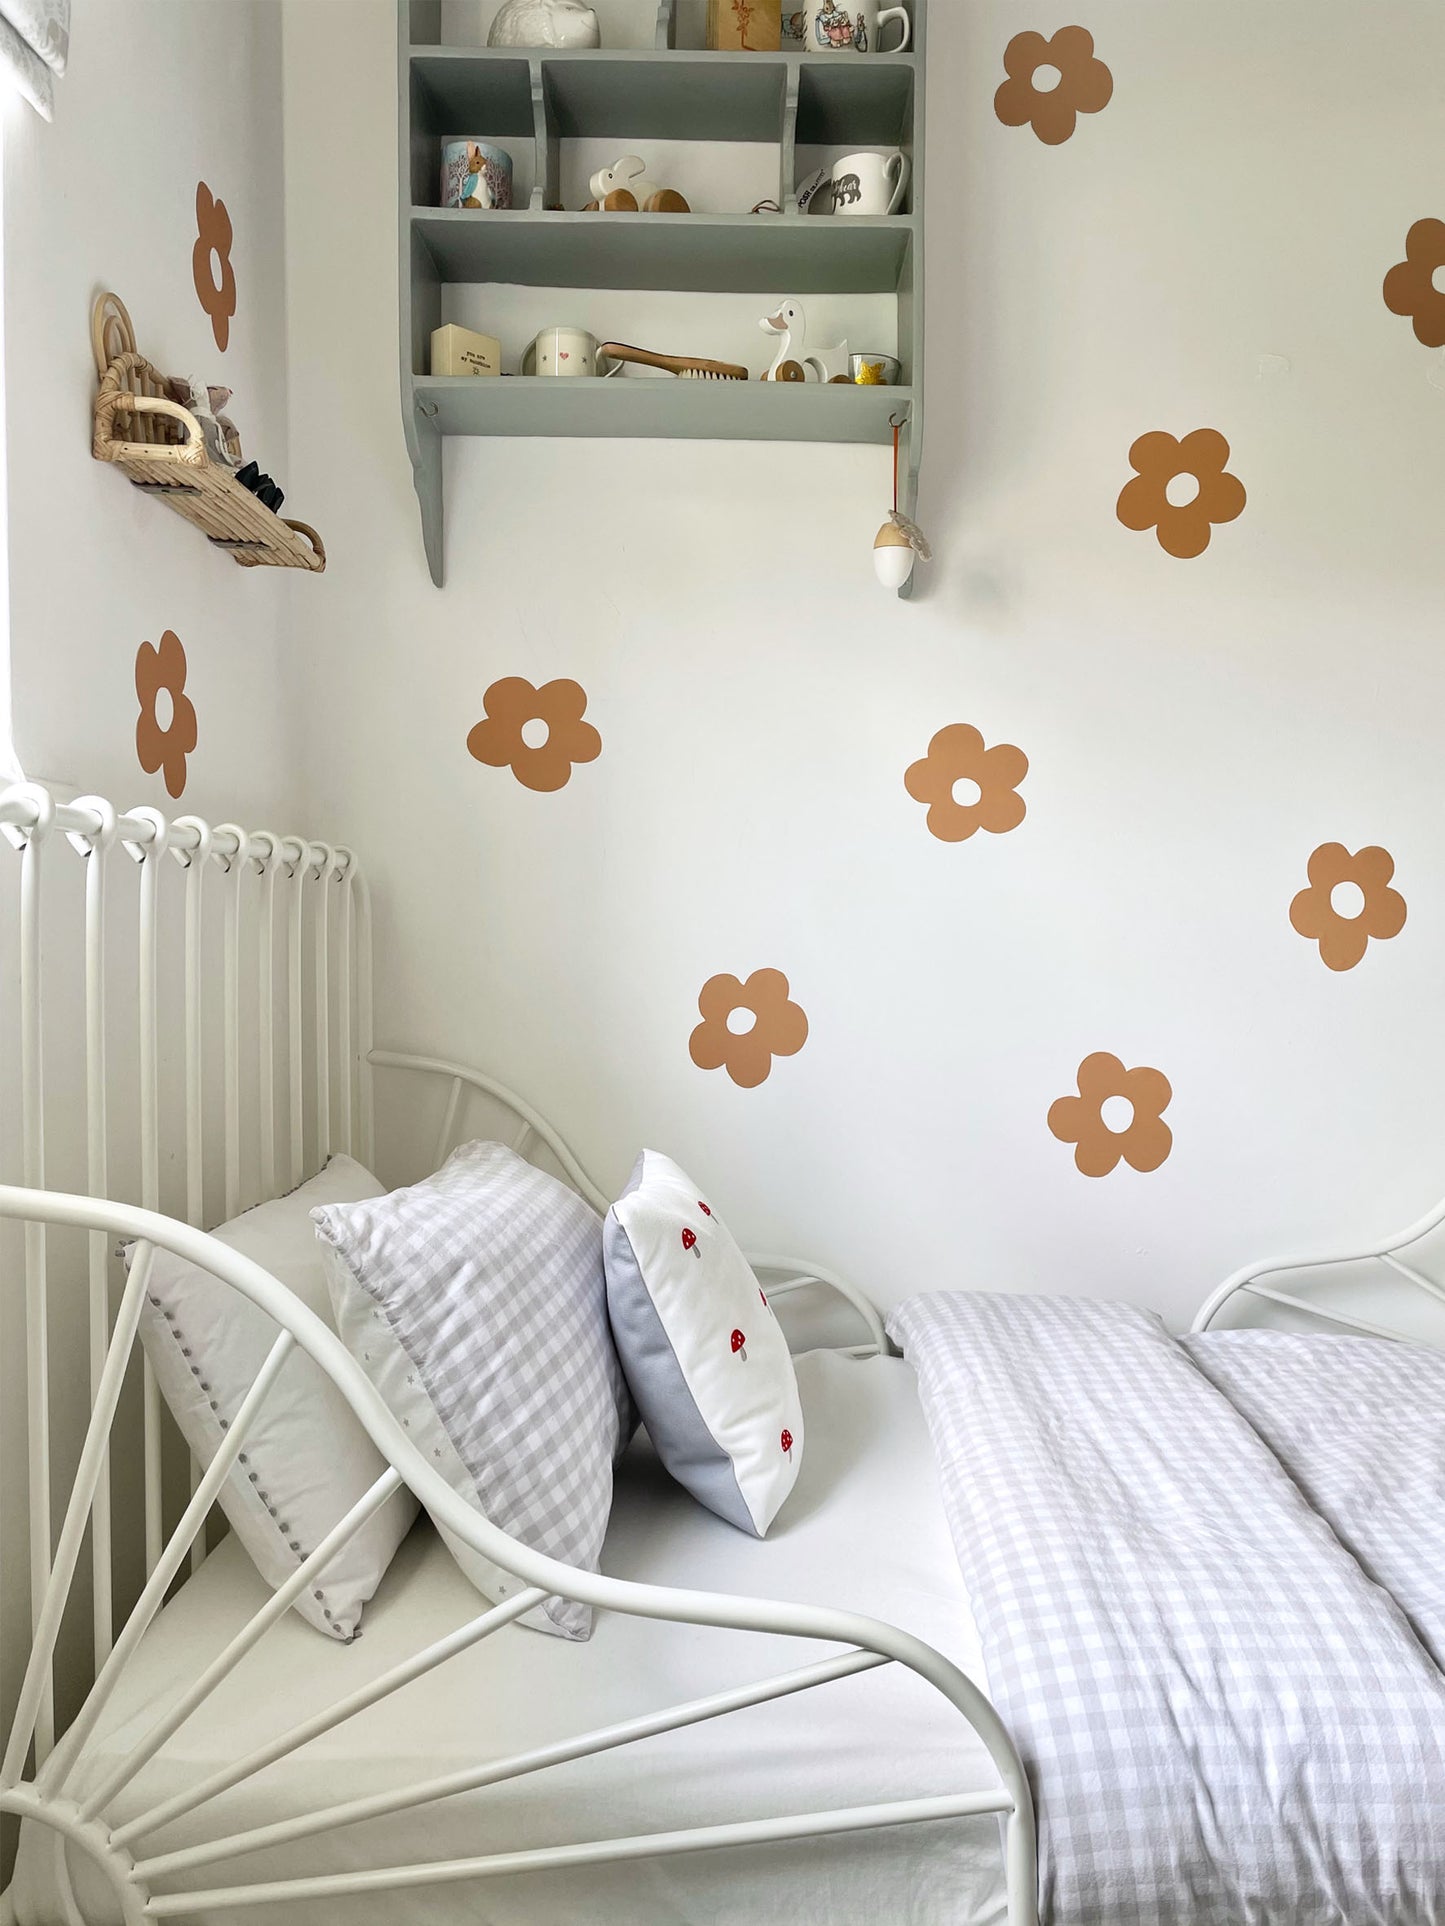 Mustard Flower Wall Stickers | Eco-Friendly, Removable, Reusable, Fabric Wall Stickers